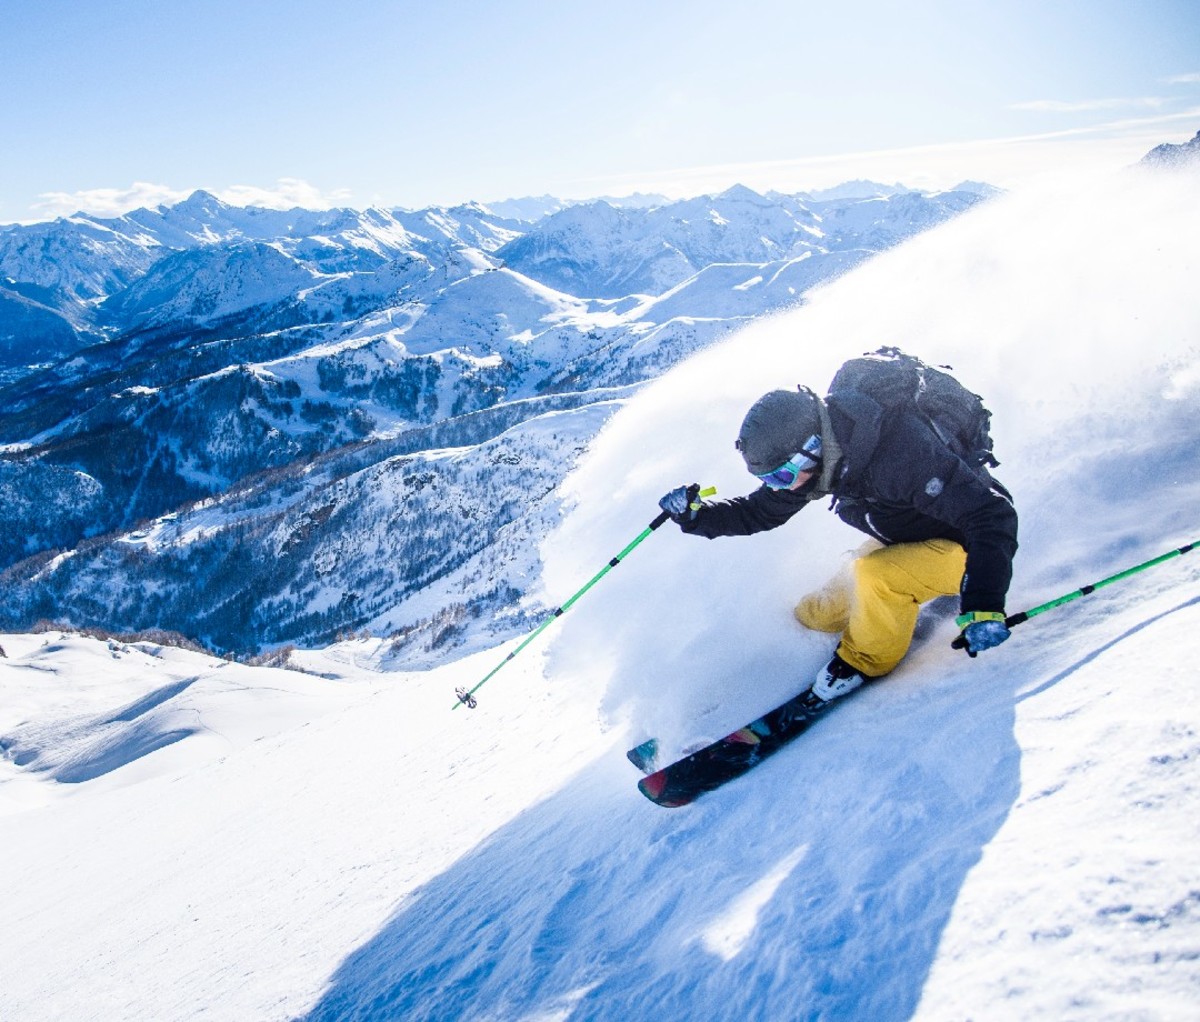 Skier turning on a slope in the alps.